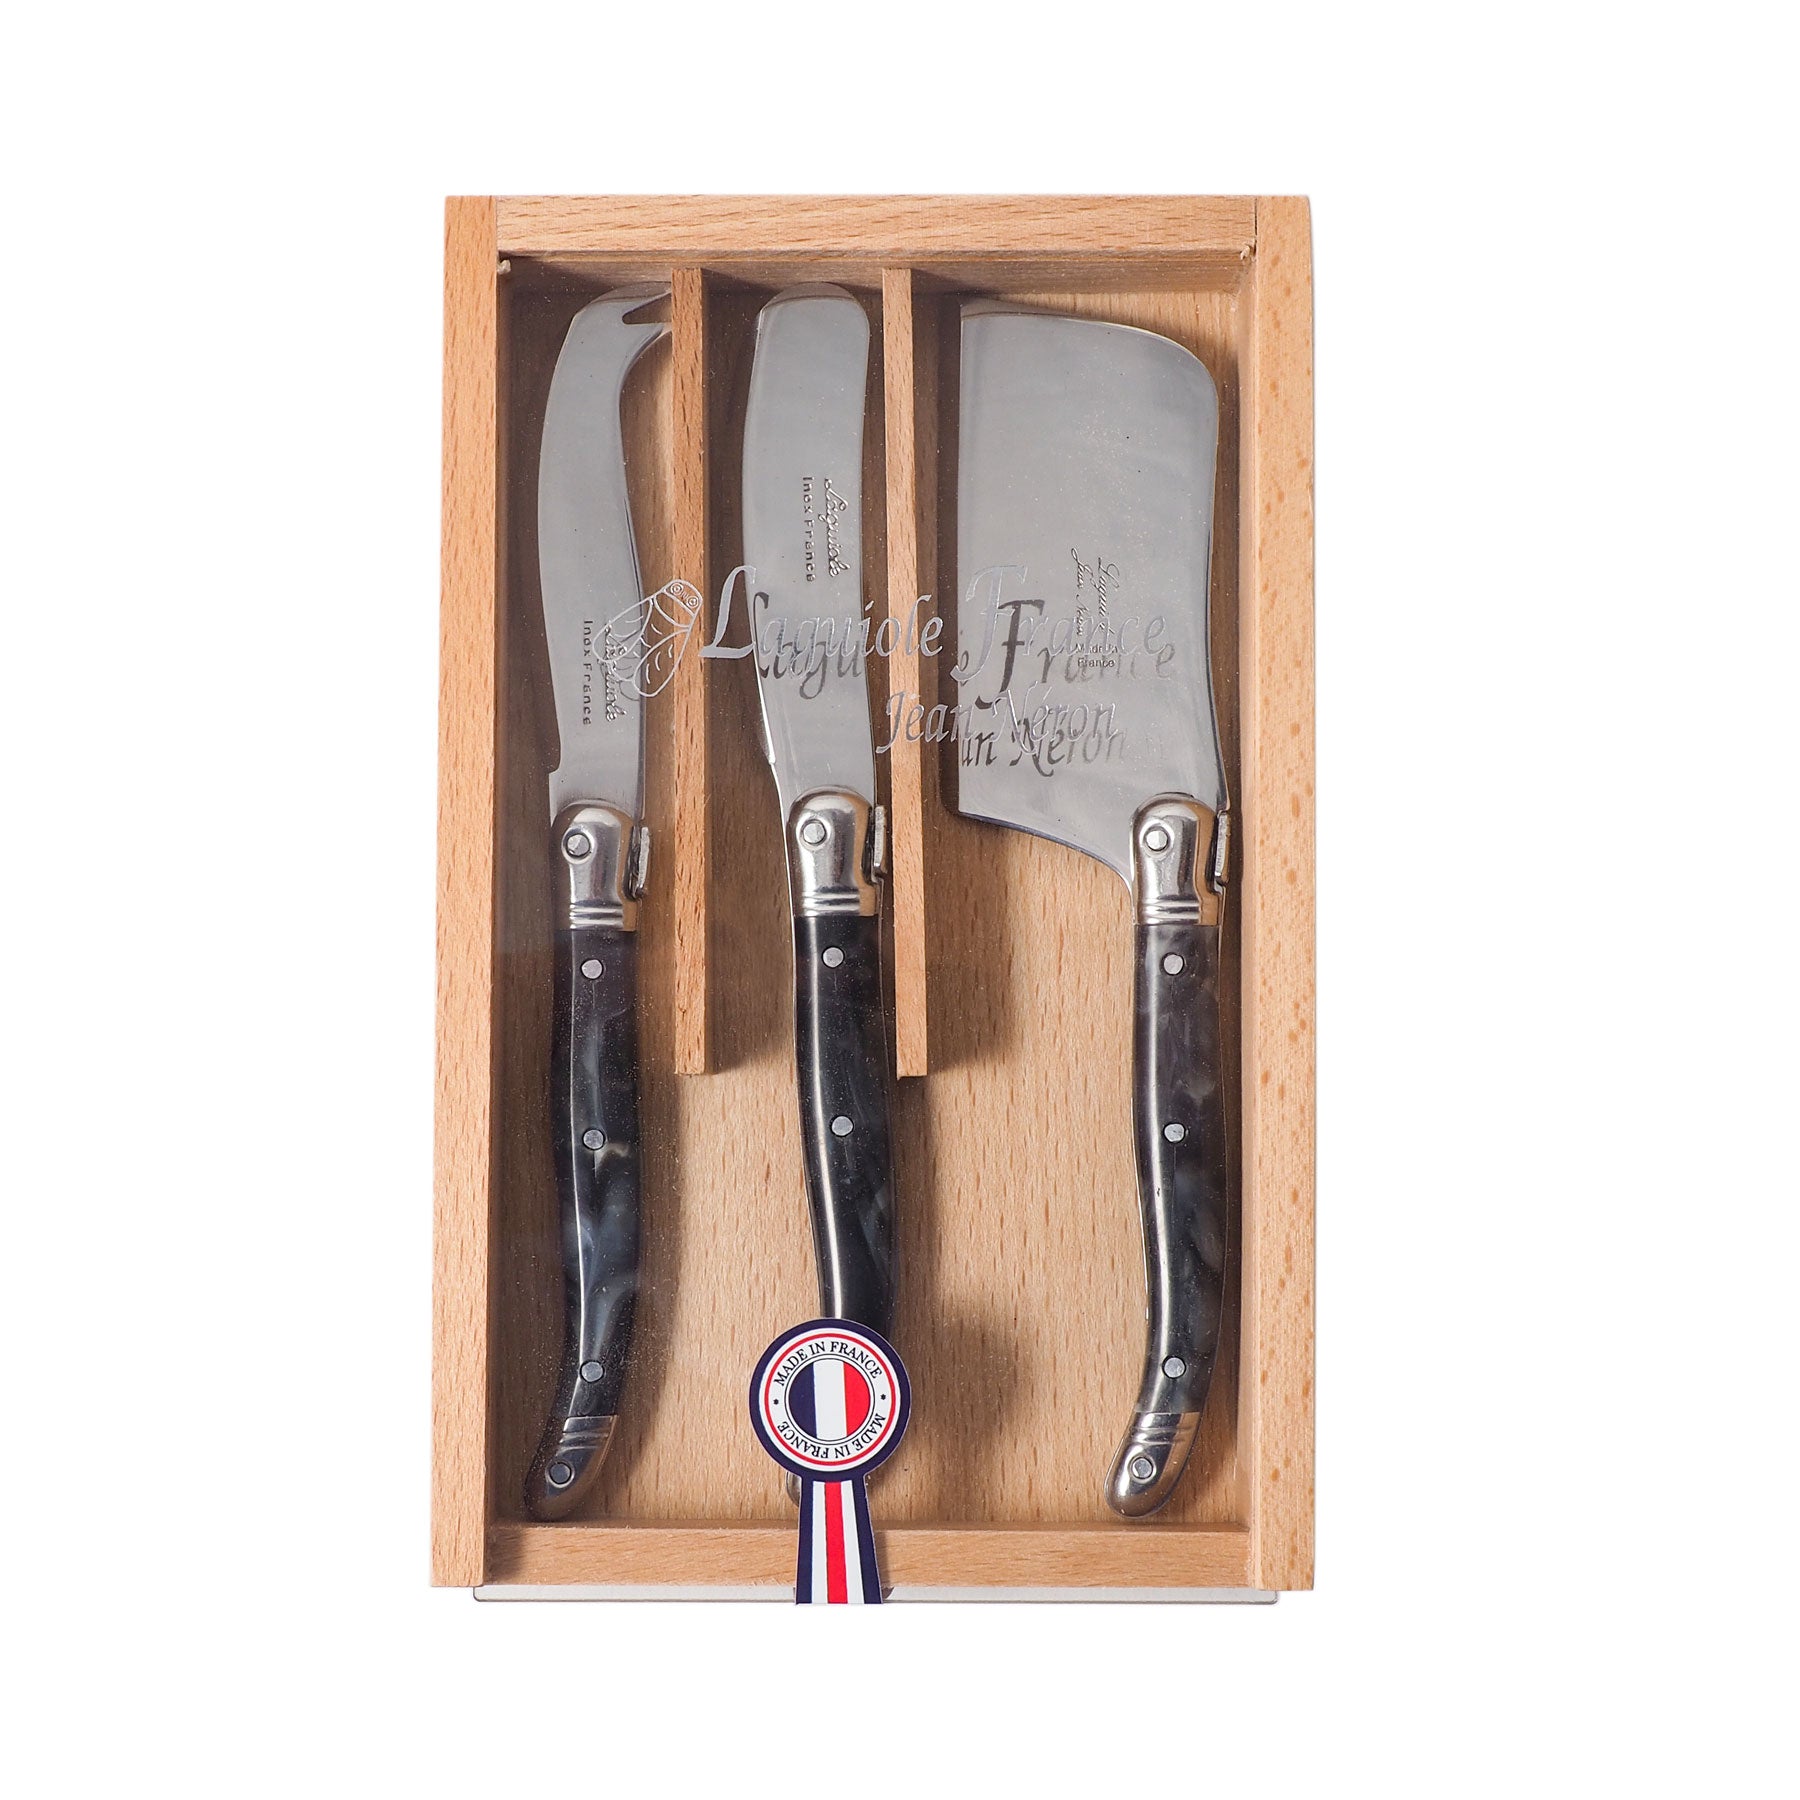 Laguiole Mini Black Marble Cheese Set in Wooden Box with Acrylic Lid (Set of 3) Cutlery Set Laguiole Brand_Laguiole Cheese Sets Gift Sets Kitchen_Dinnerware Kitchen_Kitchenware Laguiole Loose Mini Rainbow Utensils Mini Cheese Sets 7900-3300_BM-Laguiole-Black-Marble-Set-of-3